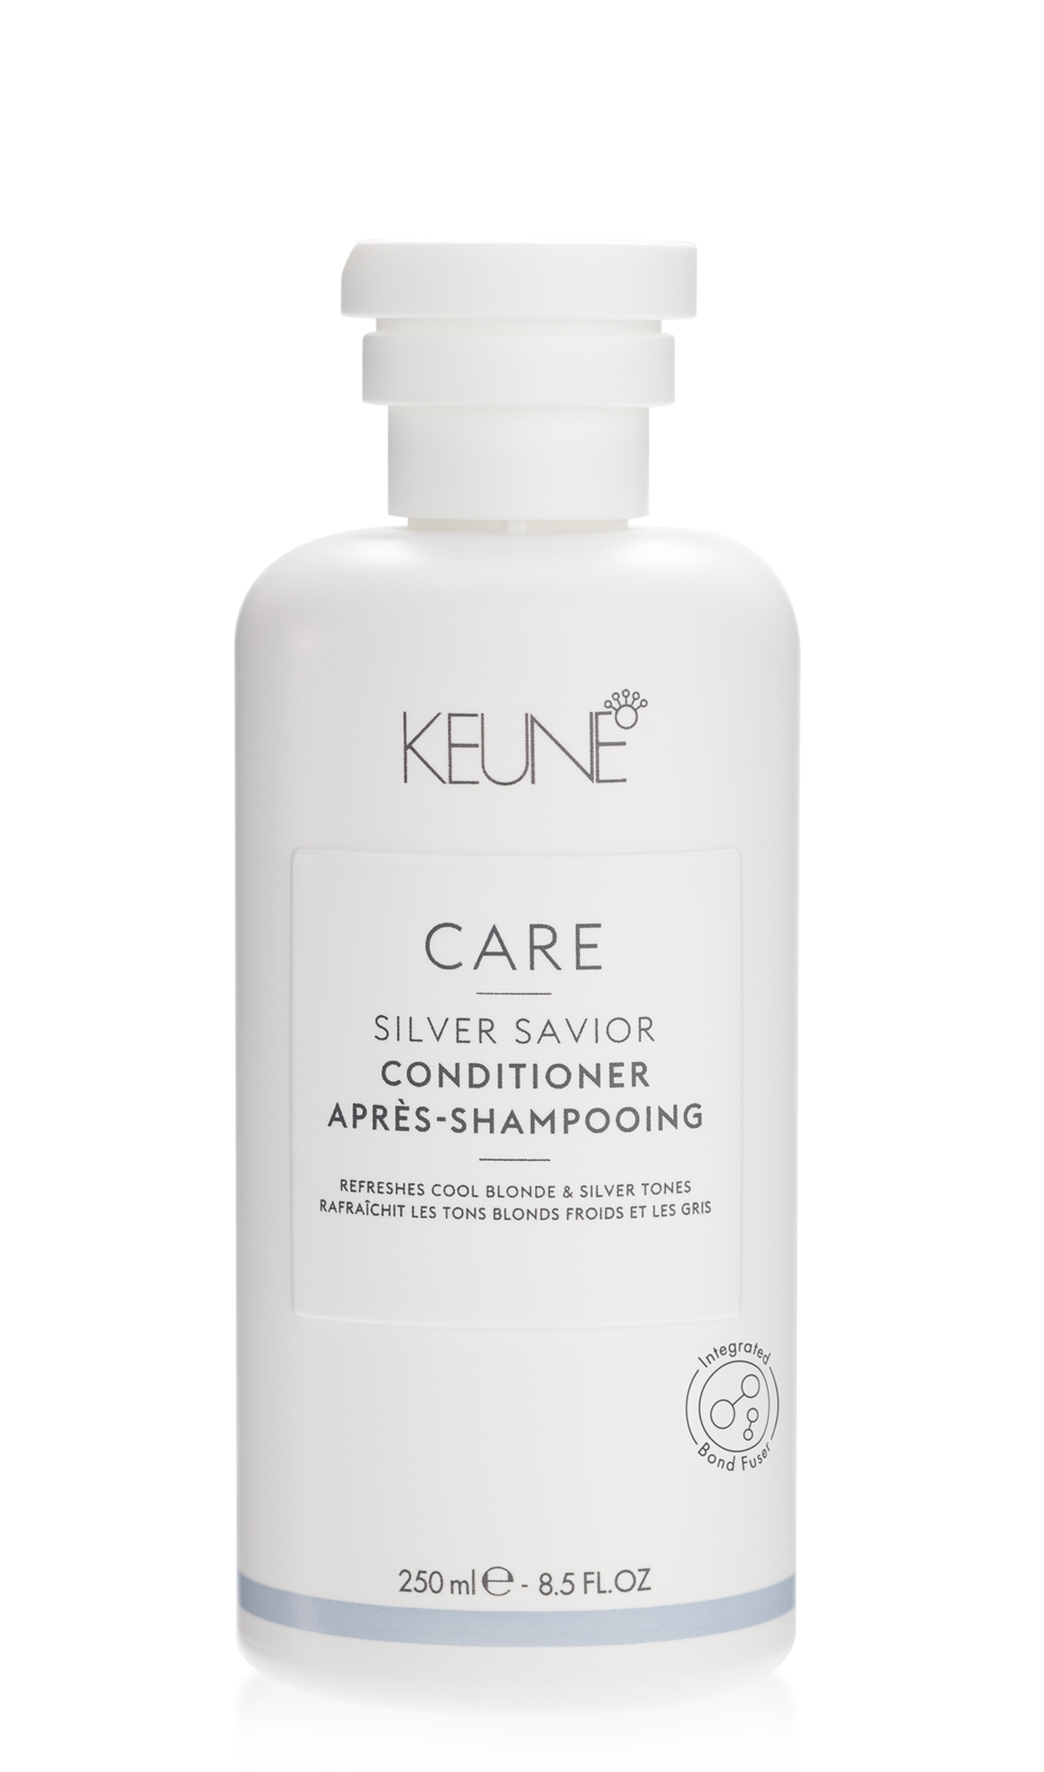 The Care Silver Savior Conditioner contains violet pigments that neutralize copper and warm tones, while Provitamin B keeps the hair smooth and nourished. Available on keune.ch.